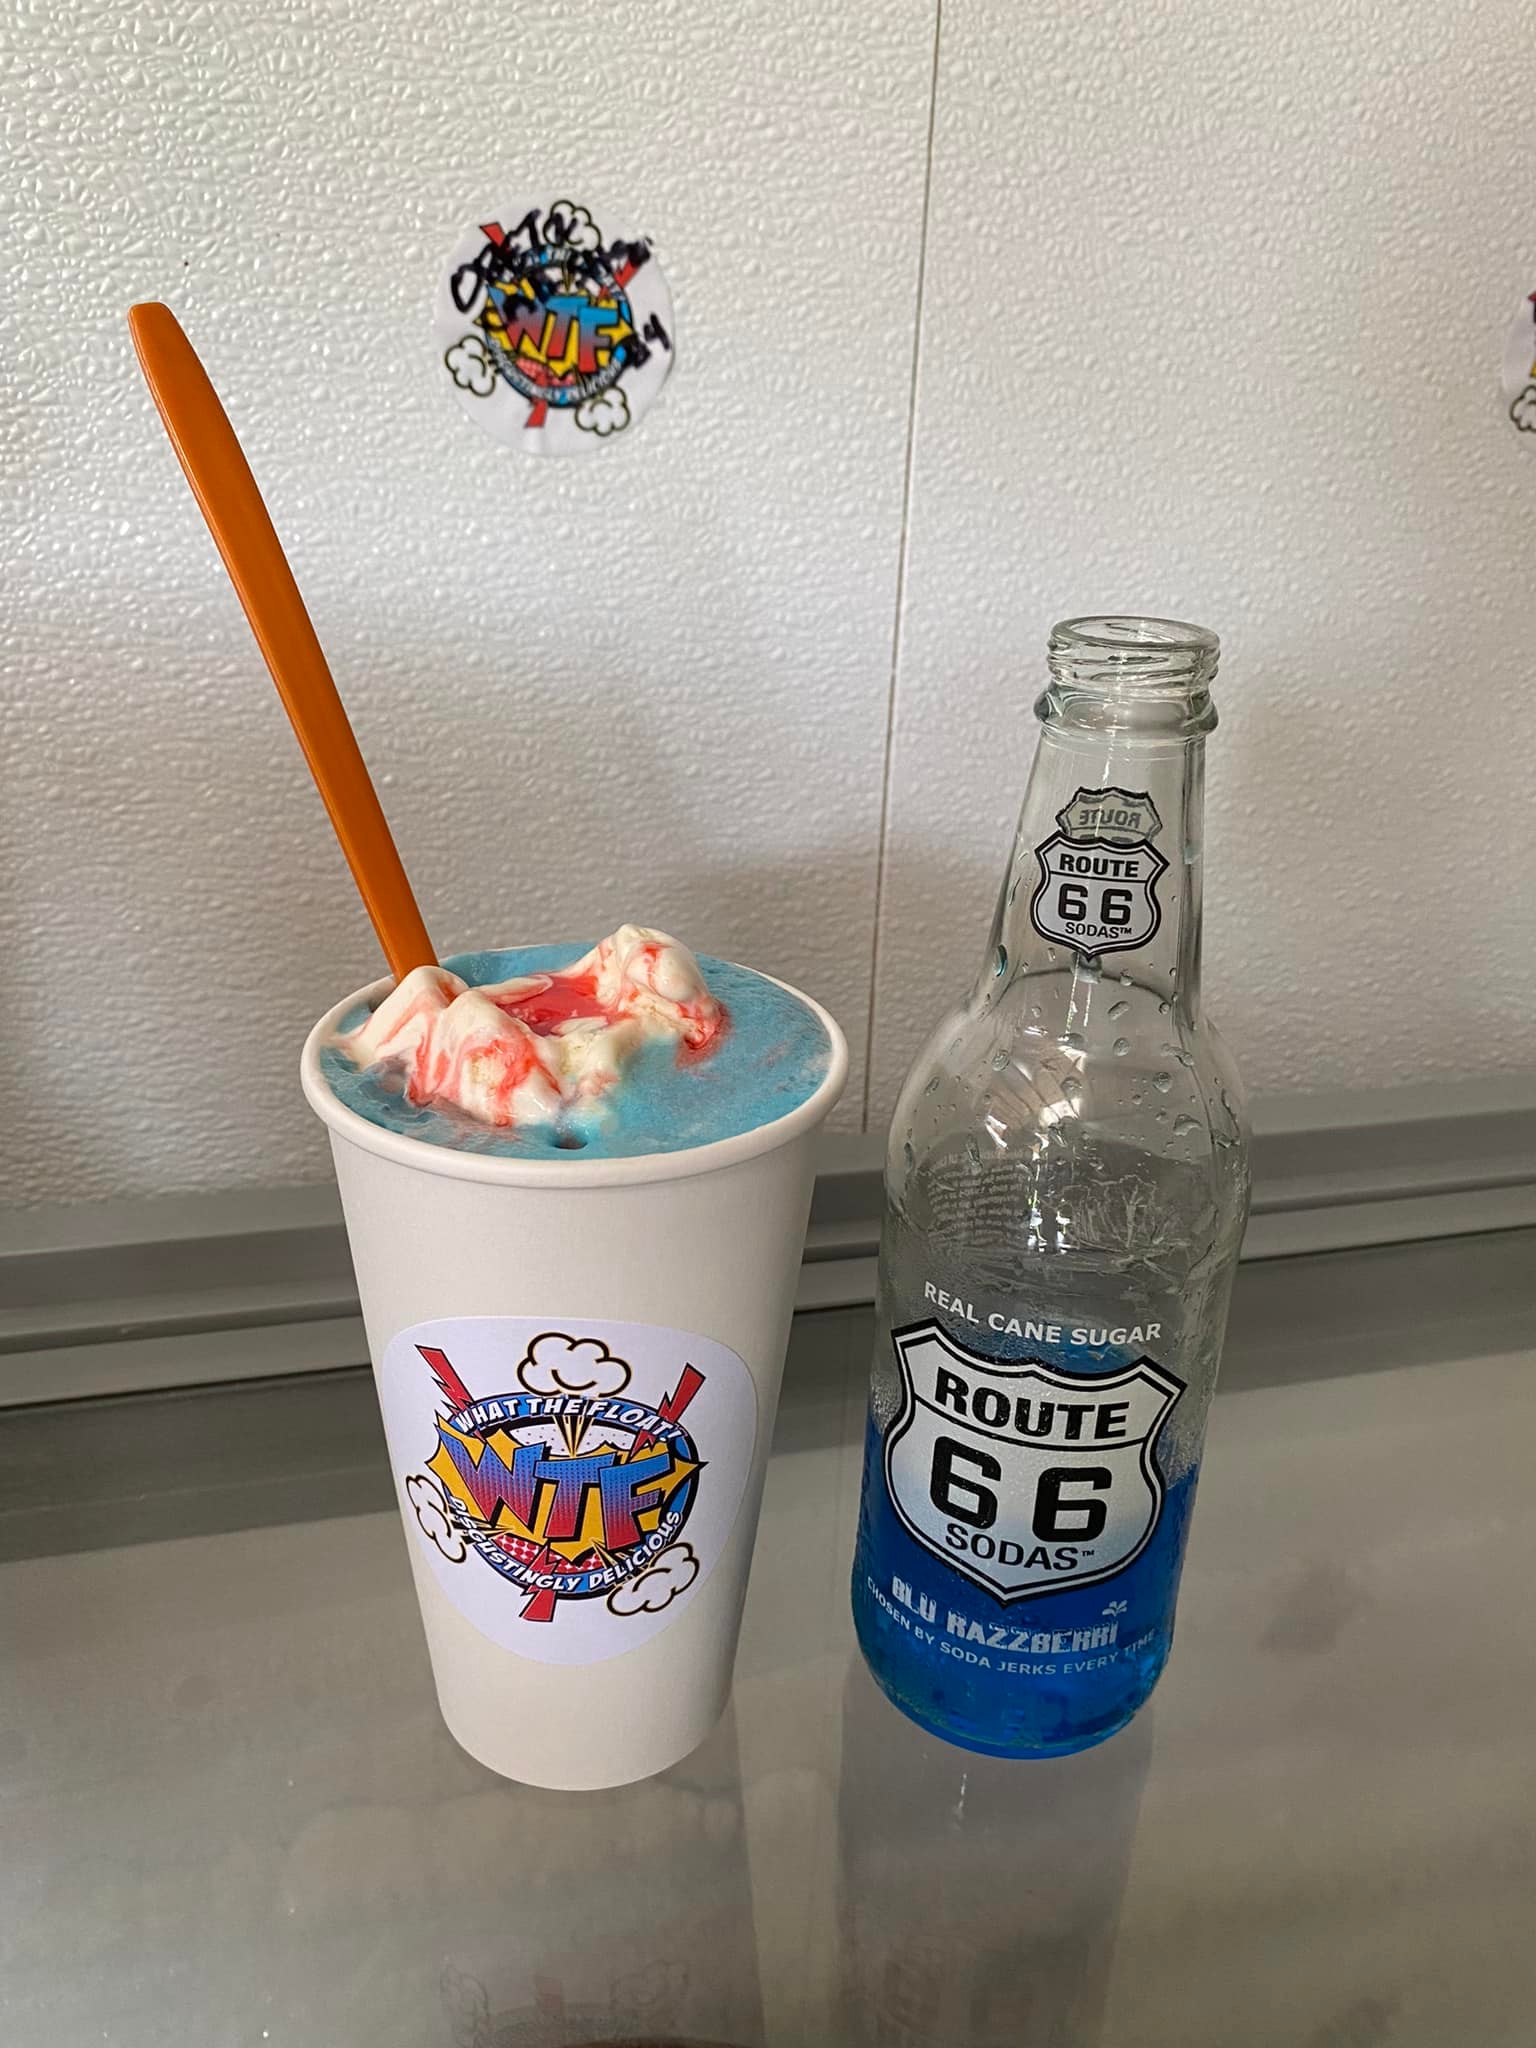 Combination soda bar, candy store and build-your-own ice cream float shop opening next week